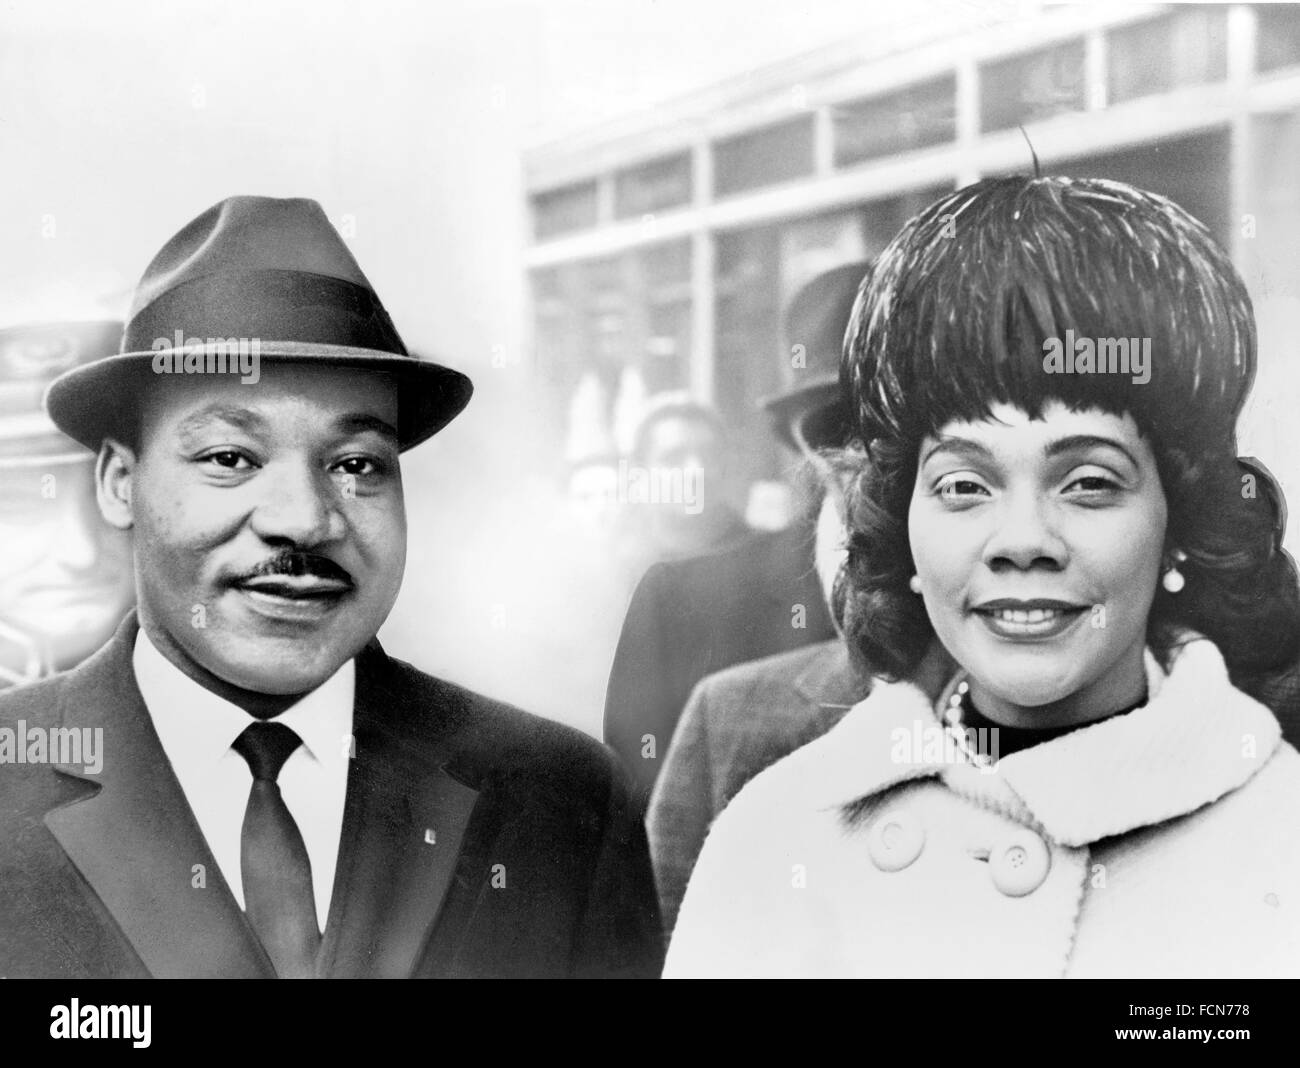 Dr Martin Luther King Jr with his wife, Coretta Scott King, 1964. Taken from a photographic print that was heavily retouched by hand. Stock Photo